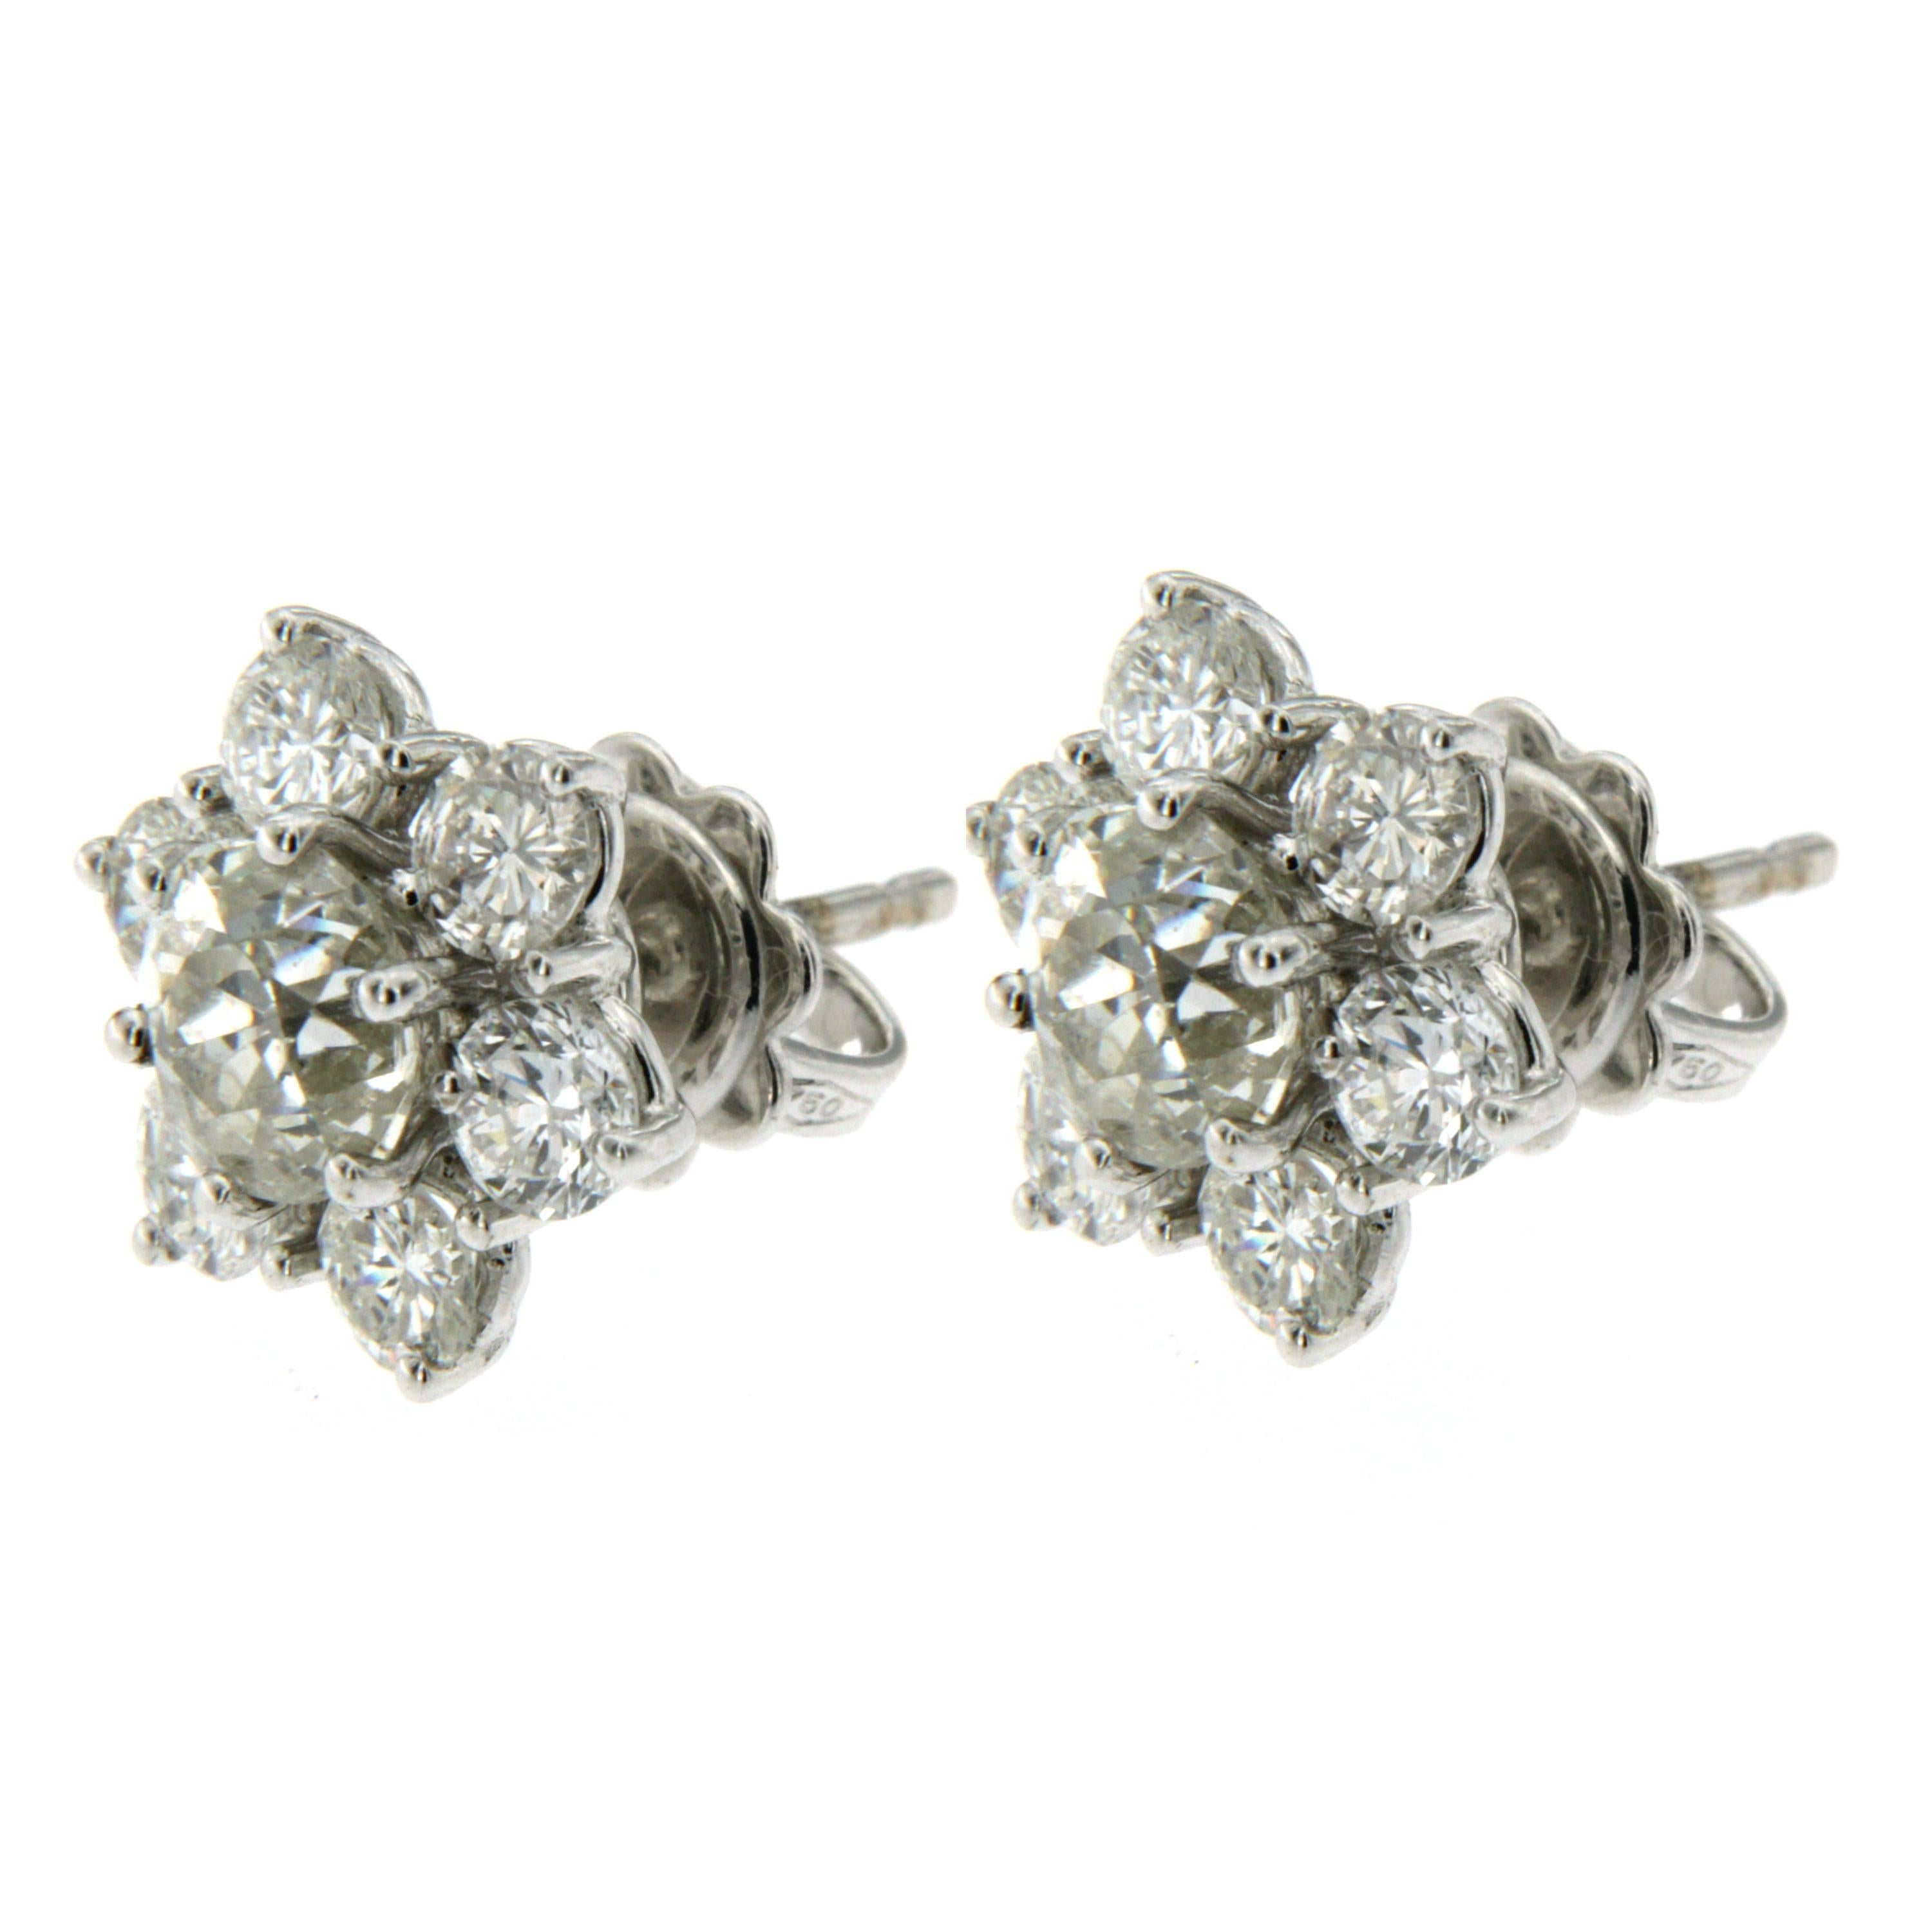 This Gorgeous Diamonds cluster earrings are set with an old mine cut diamond a little less 2 carat for a total. 1.96ct -  surrounded by 12 old mine cut diamonds, for an approx.weight of 1.80 carats.
Approx. total diamond weight 3.76 carats. 
The